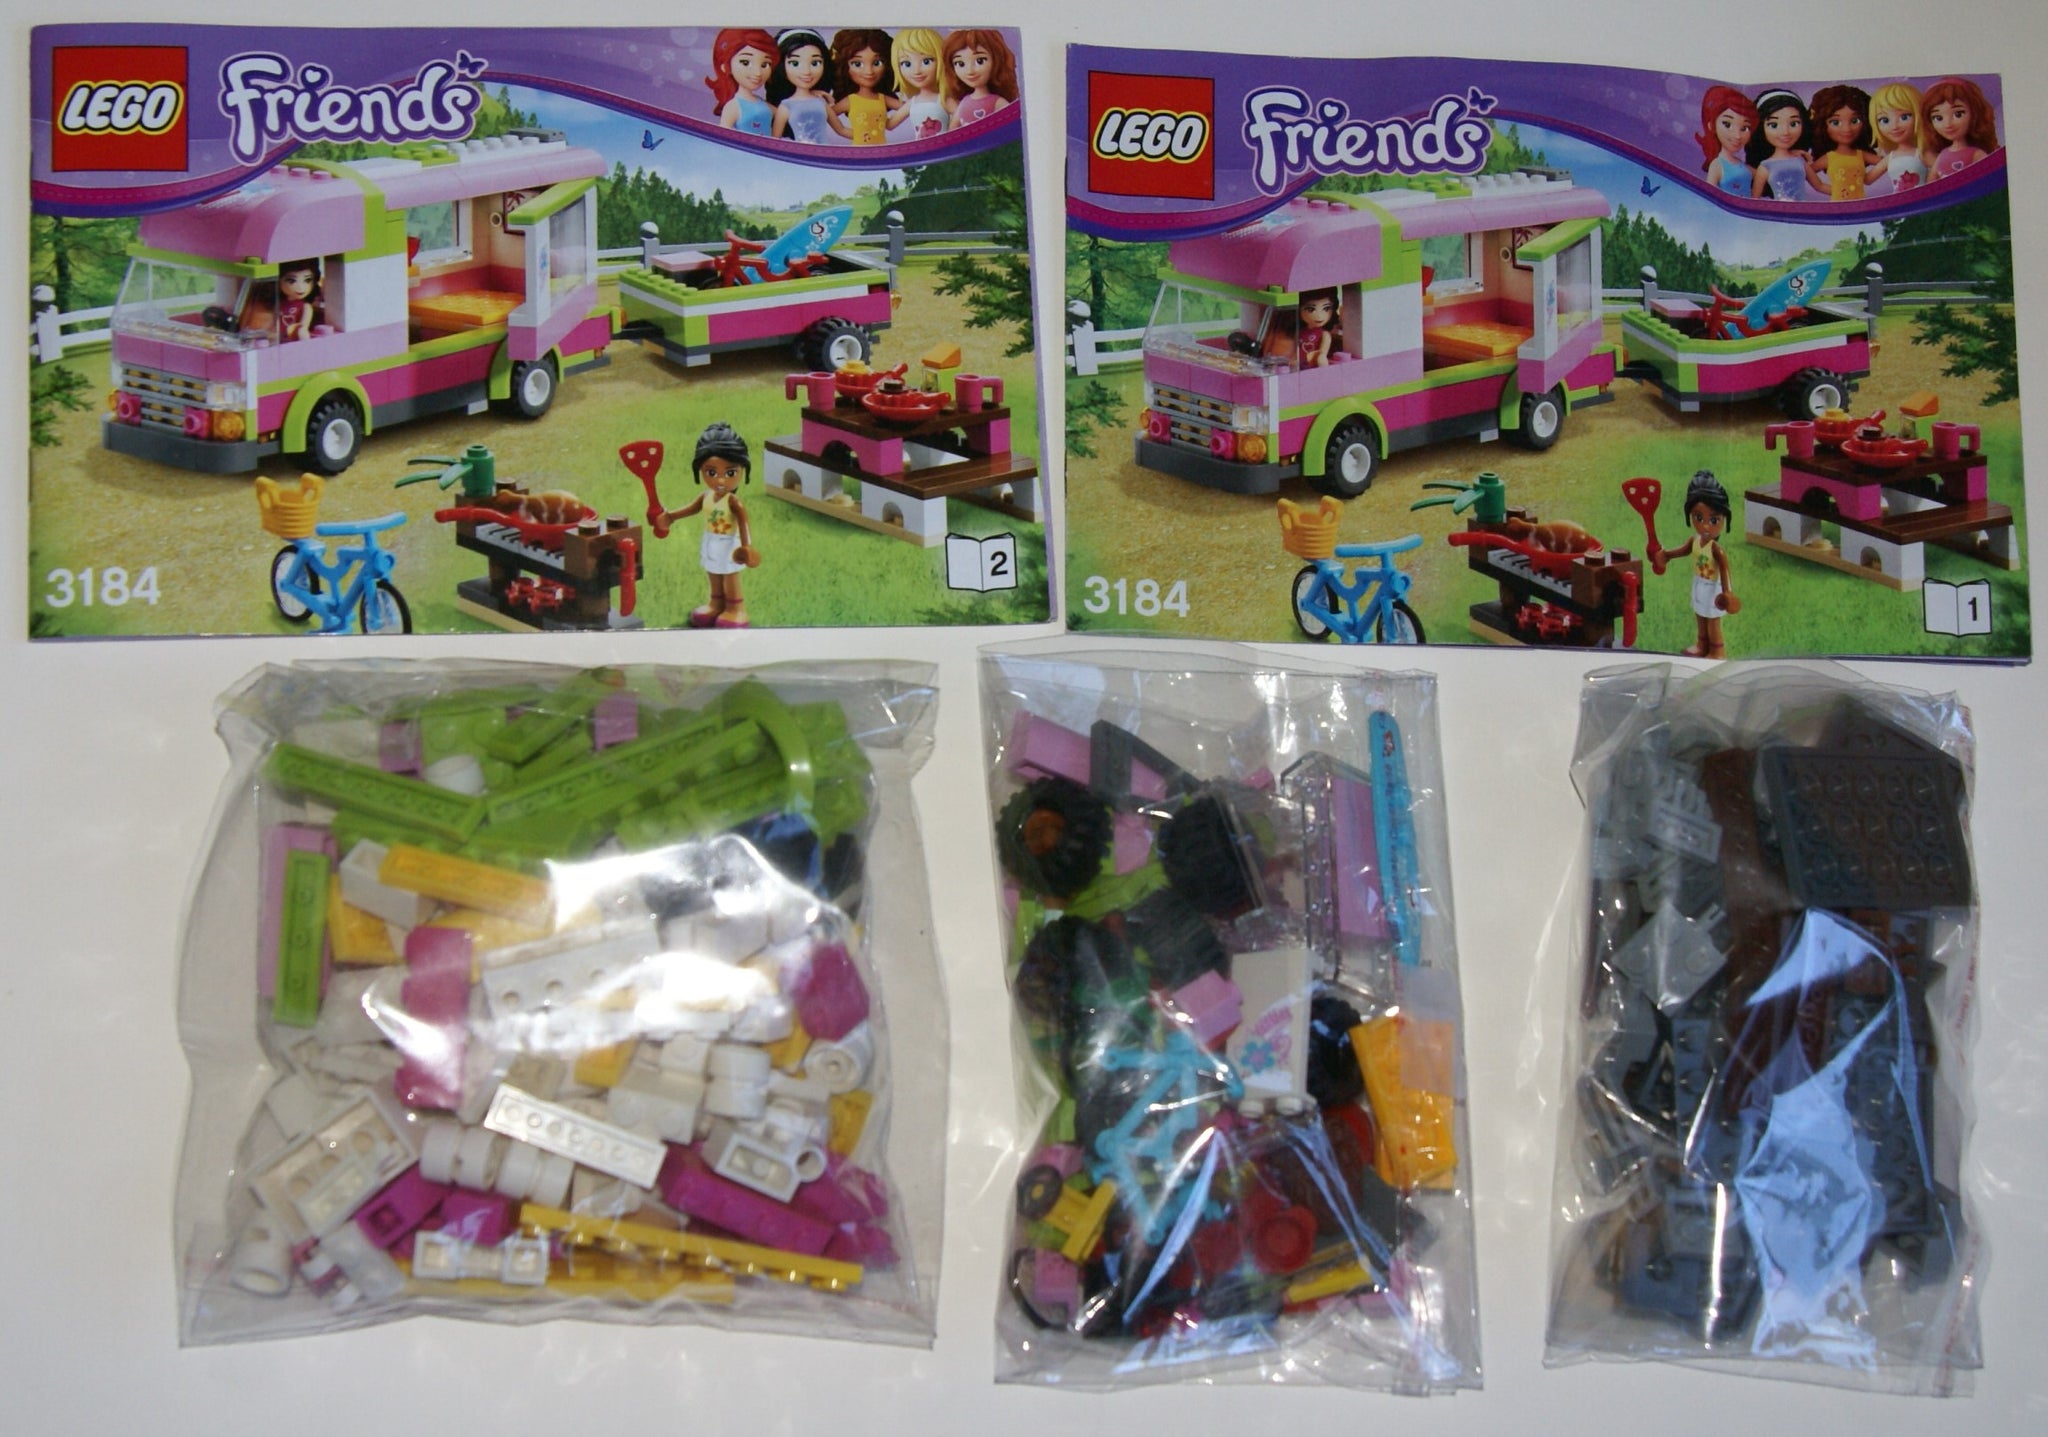 NOW RARE RETIRED LEGO FRIENDS KIT FROM Adventure Camper, Set 3184 Rarest Finds